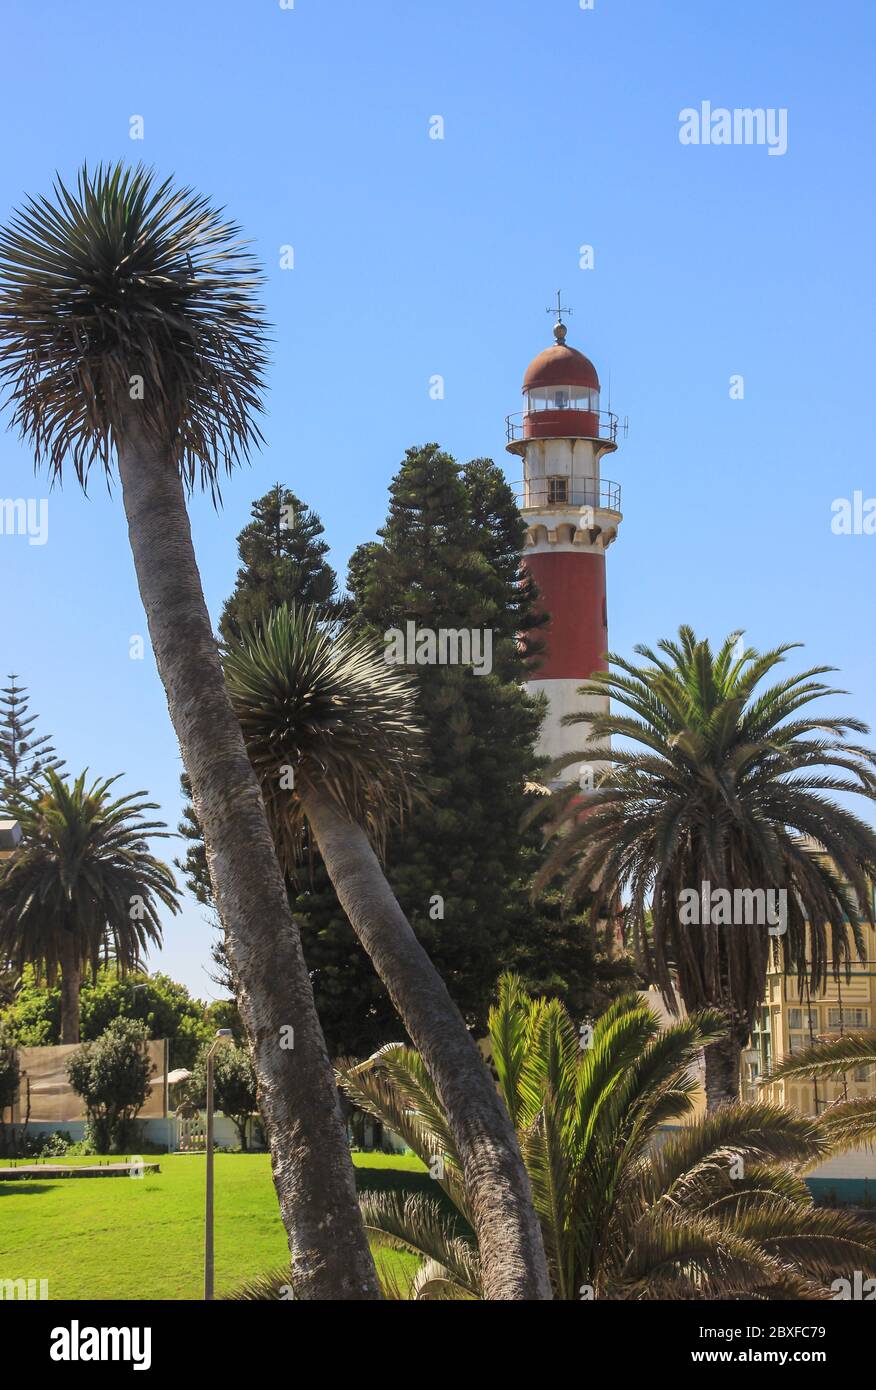 Swakopmund, Namibia - April 18, 2015: Old German red and white lighthouse, which is called "bacon" surrounded by palm trees Stock Photo